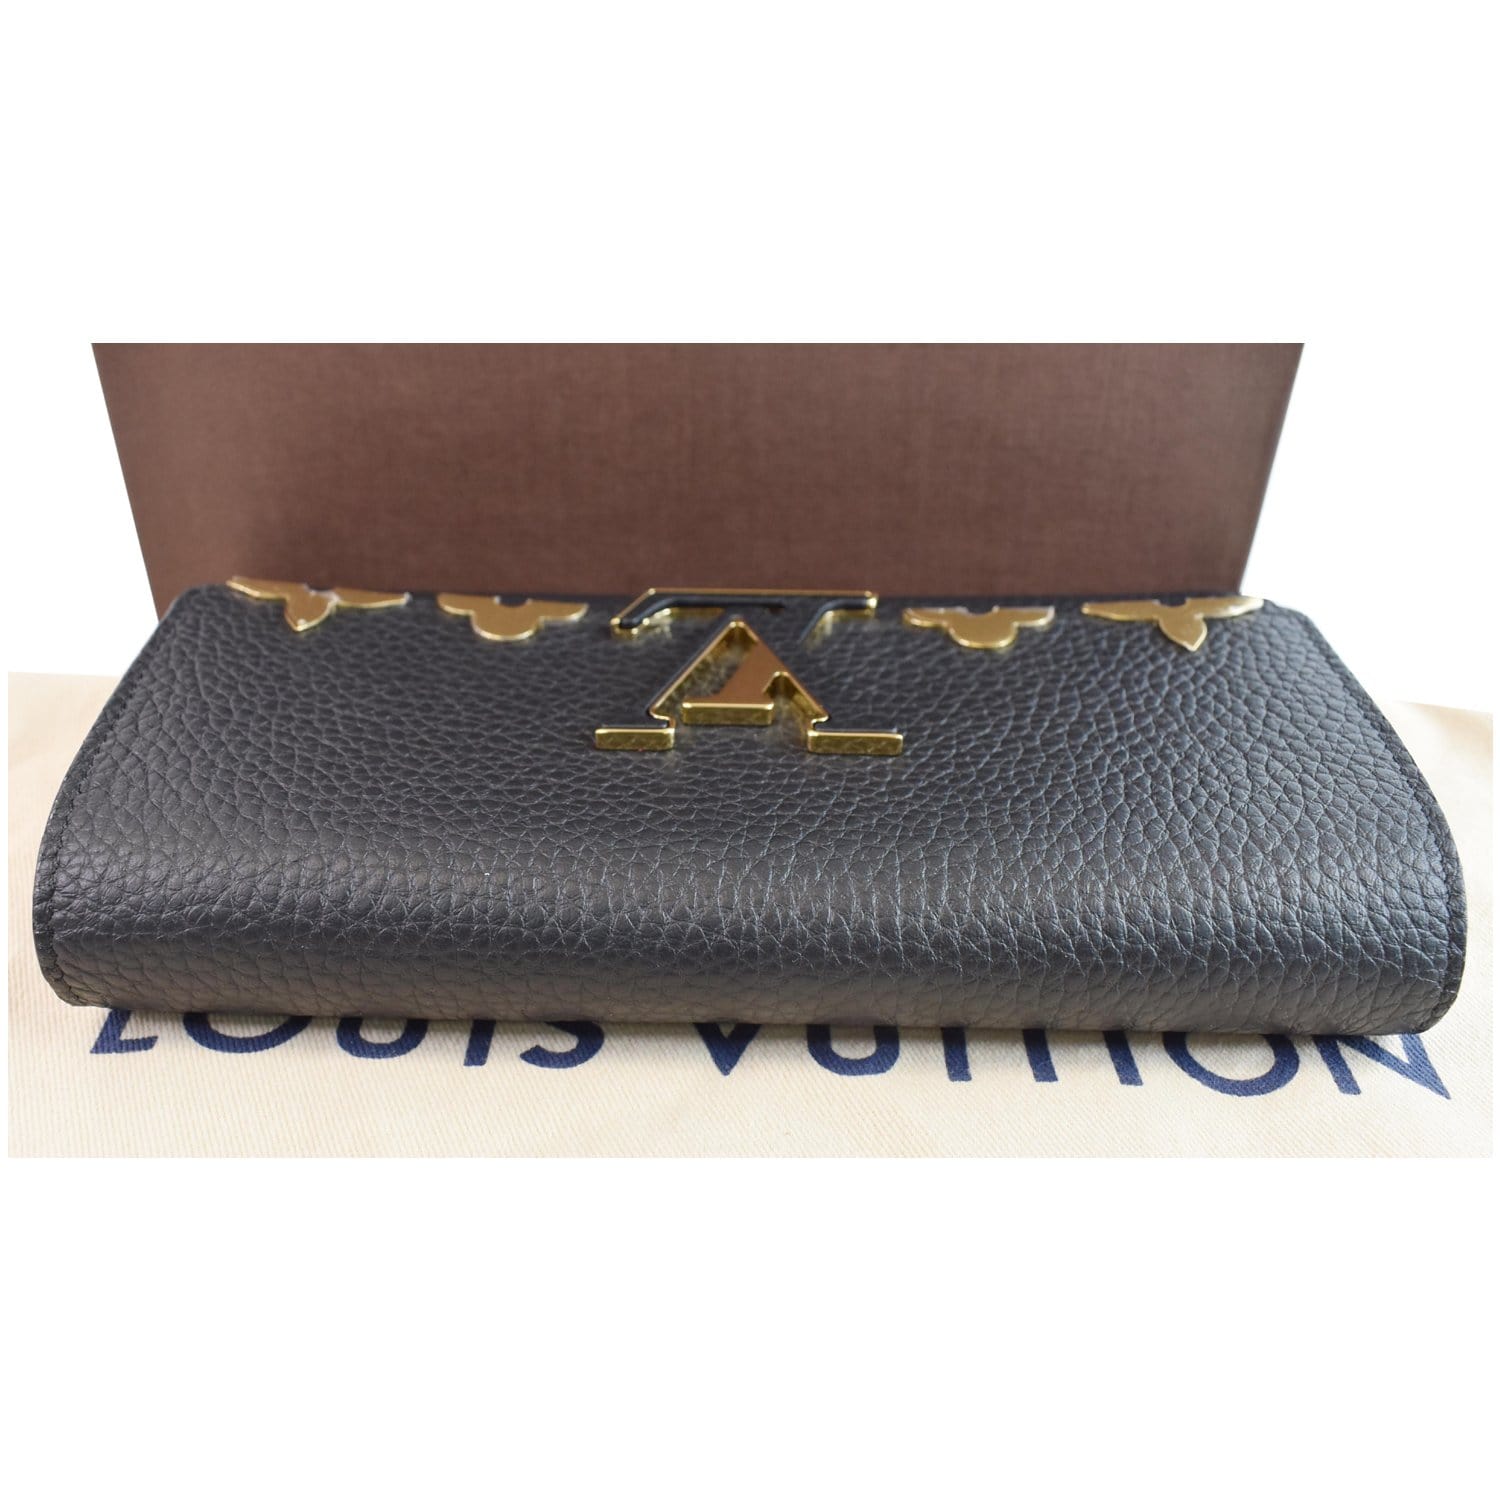 Louis Vuitton Wallpaper in Ghana for sale ▷ Prices on